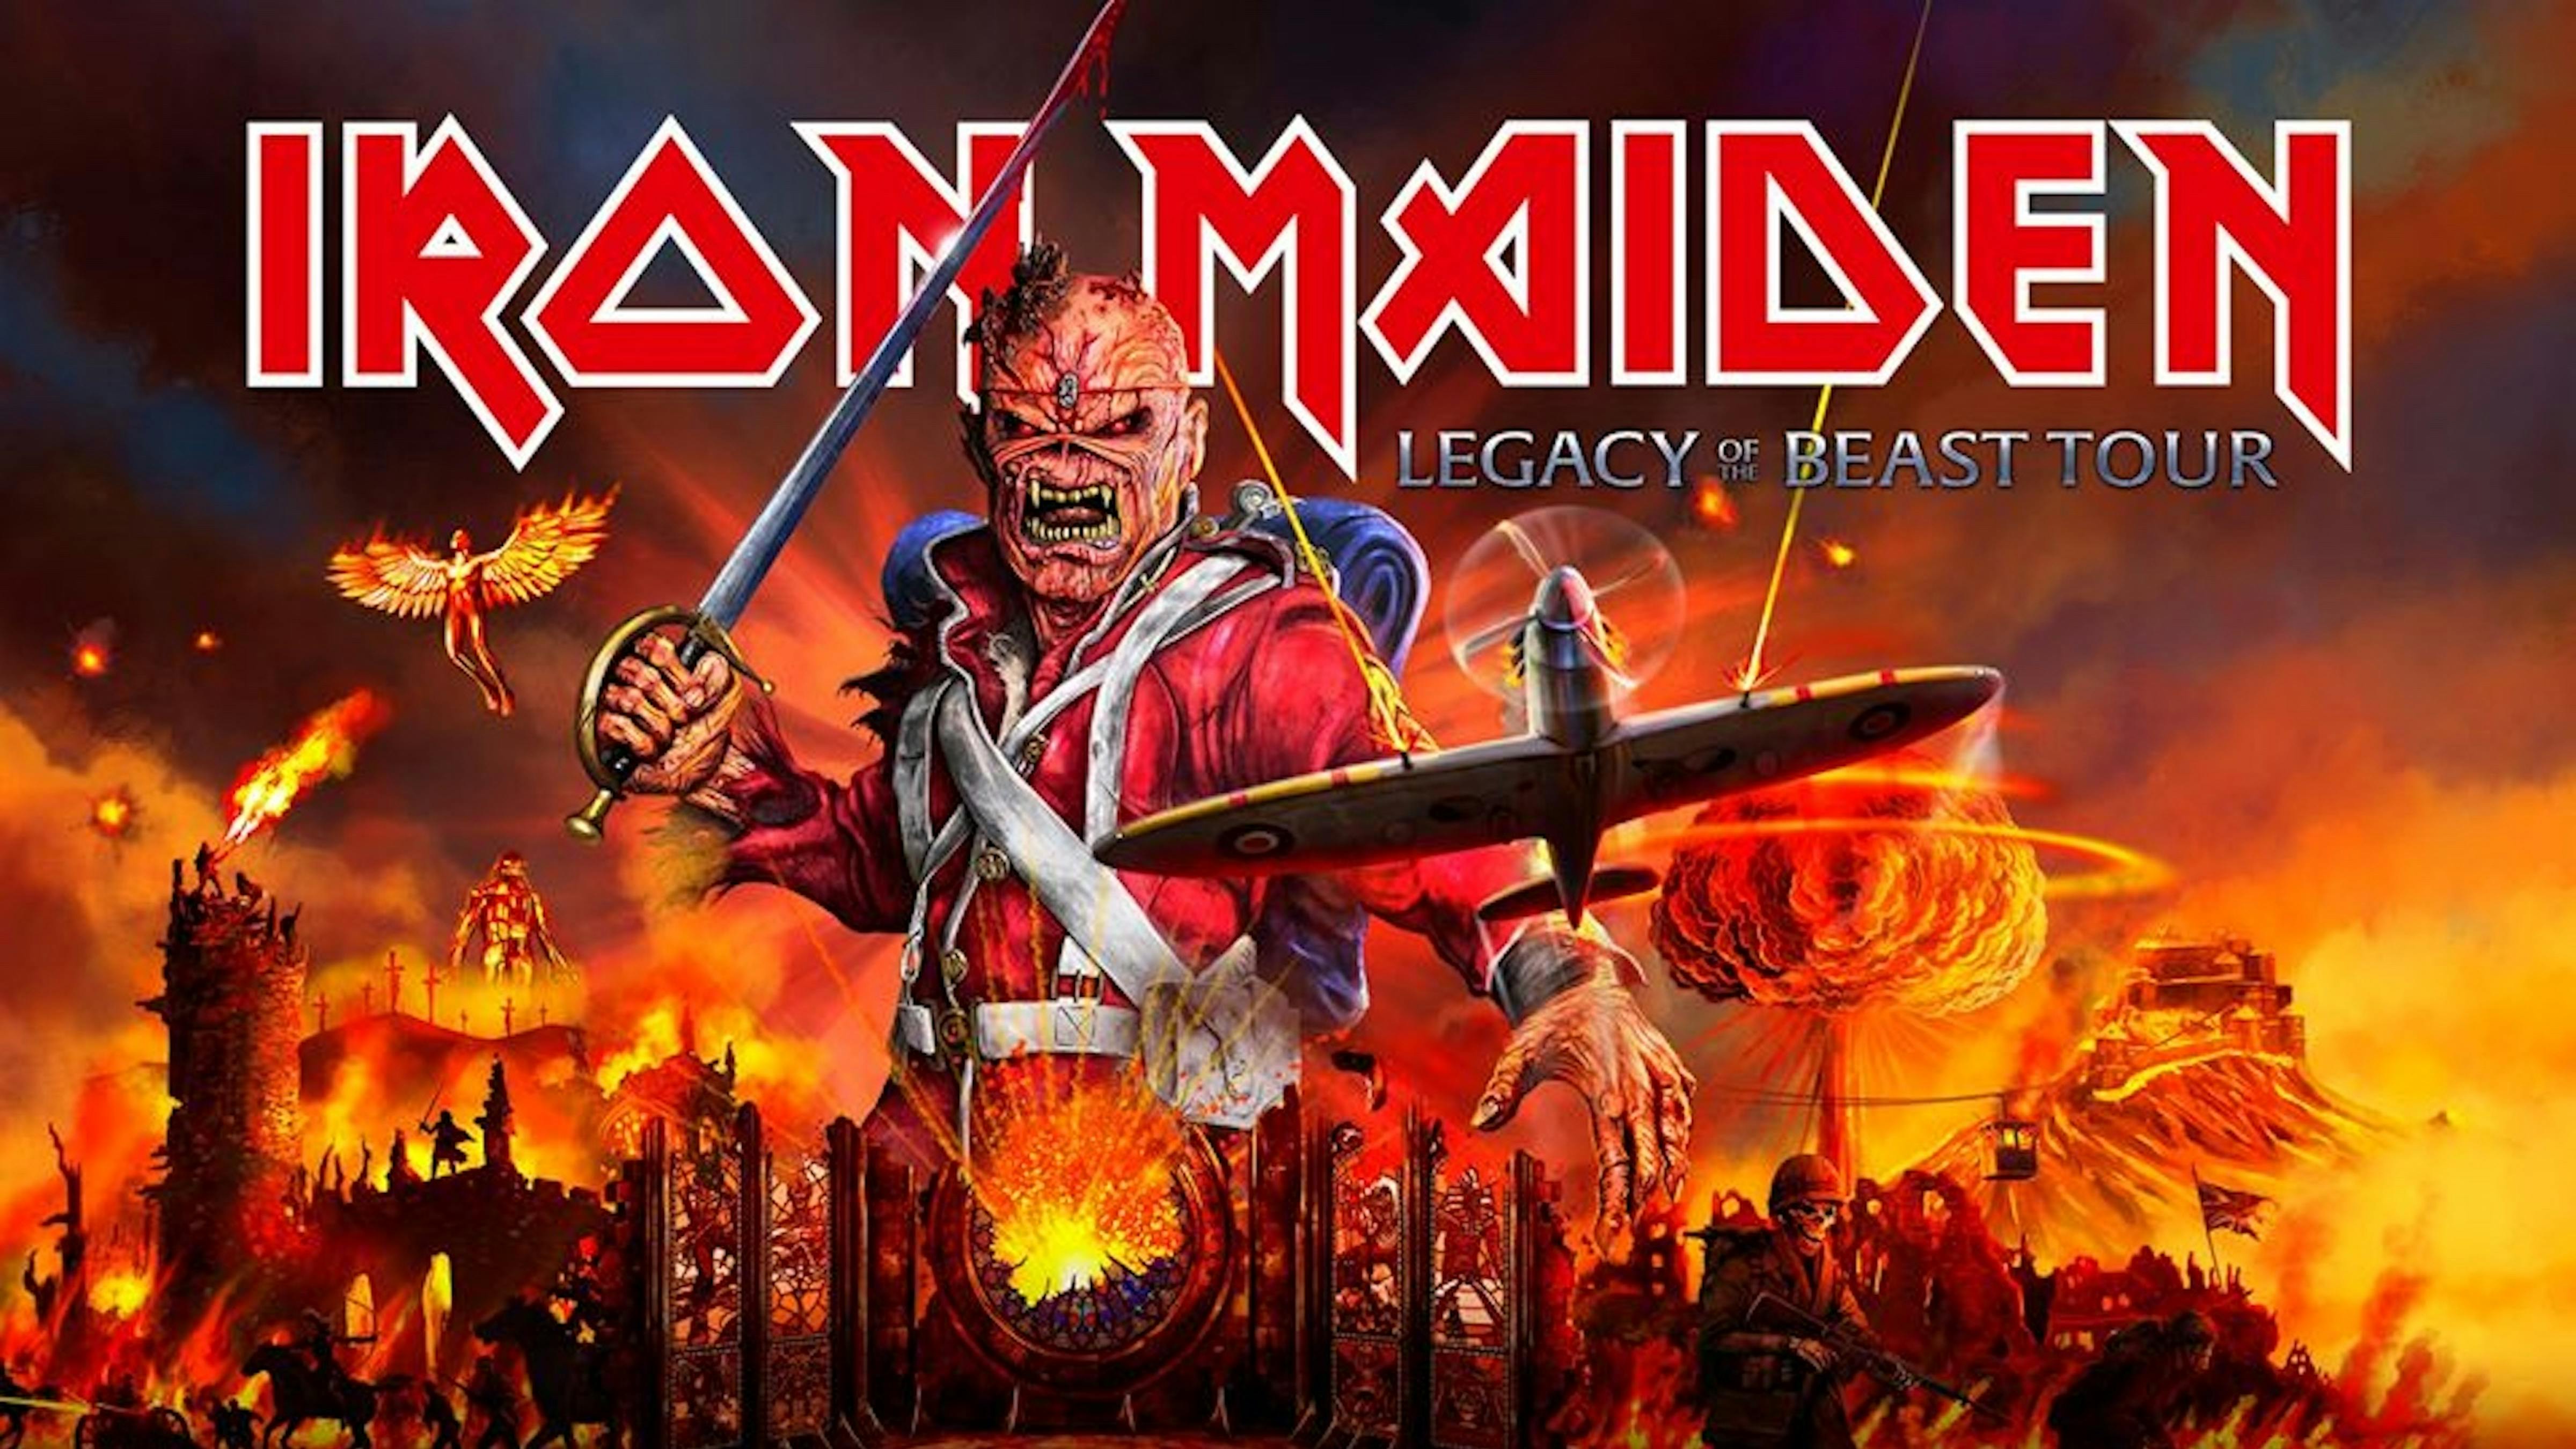 Iron Maiden Announce Australia and New Zealand Tour Dates With